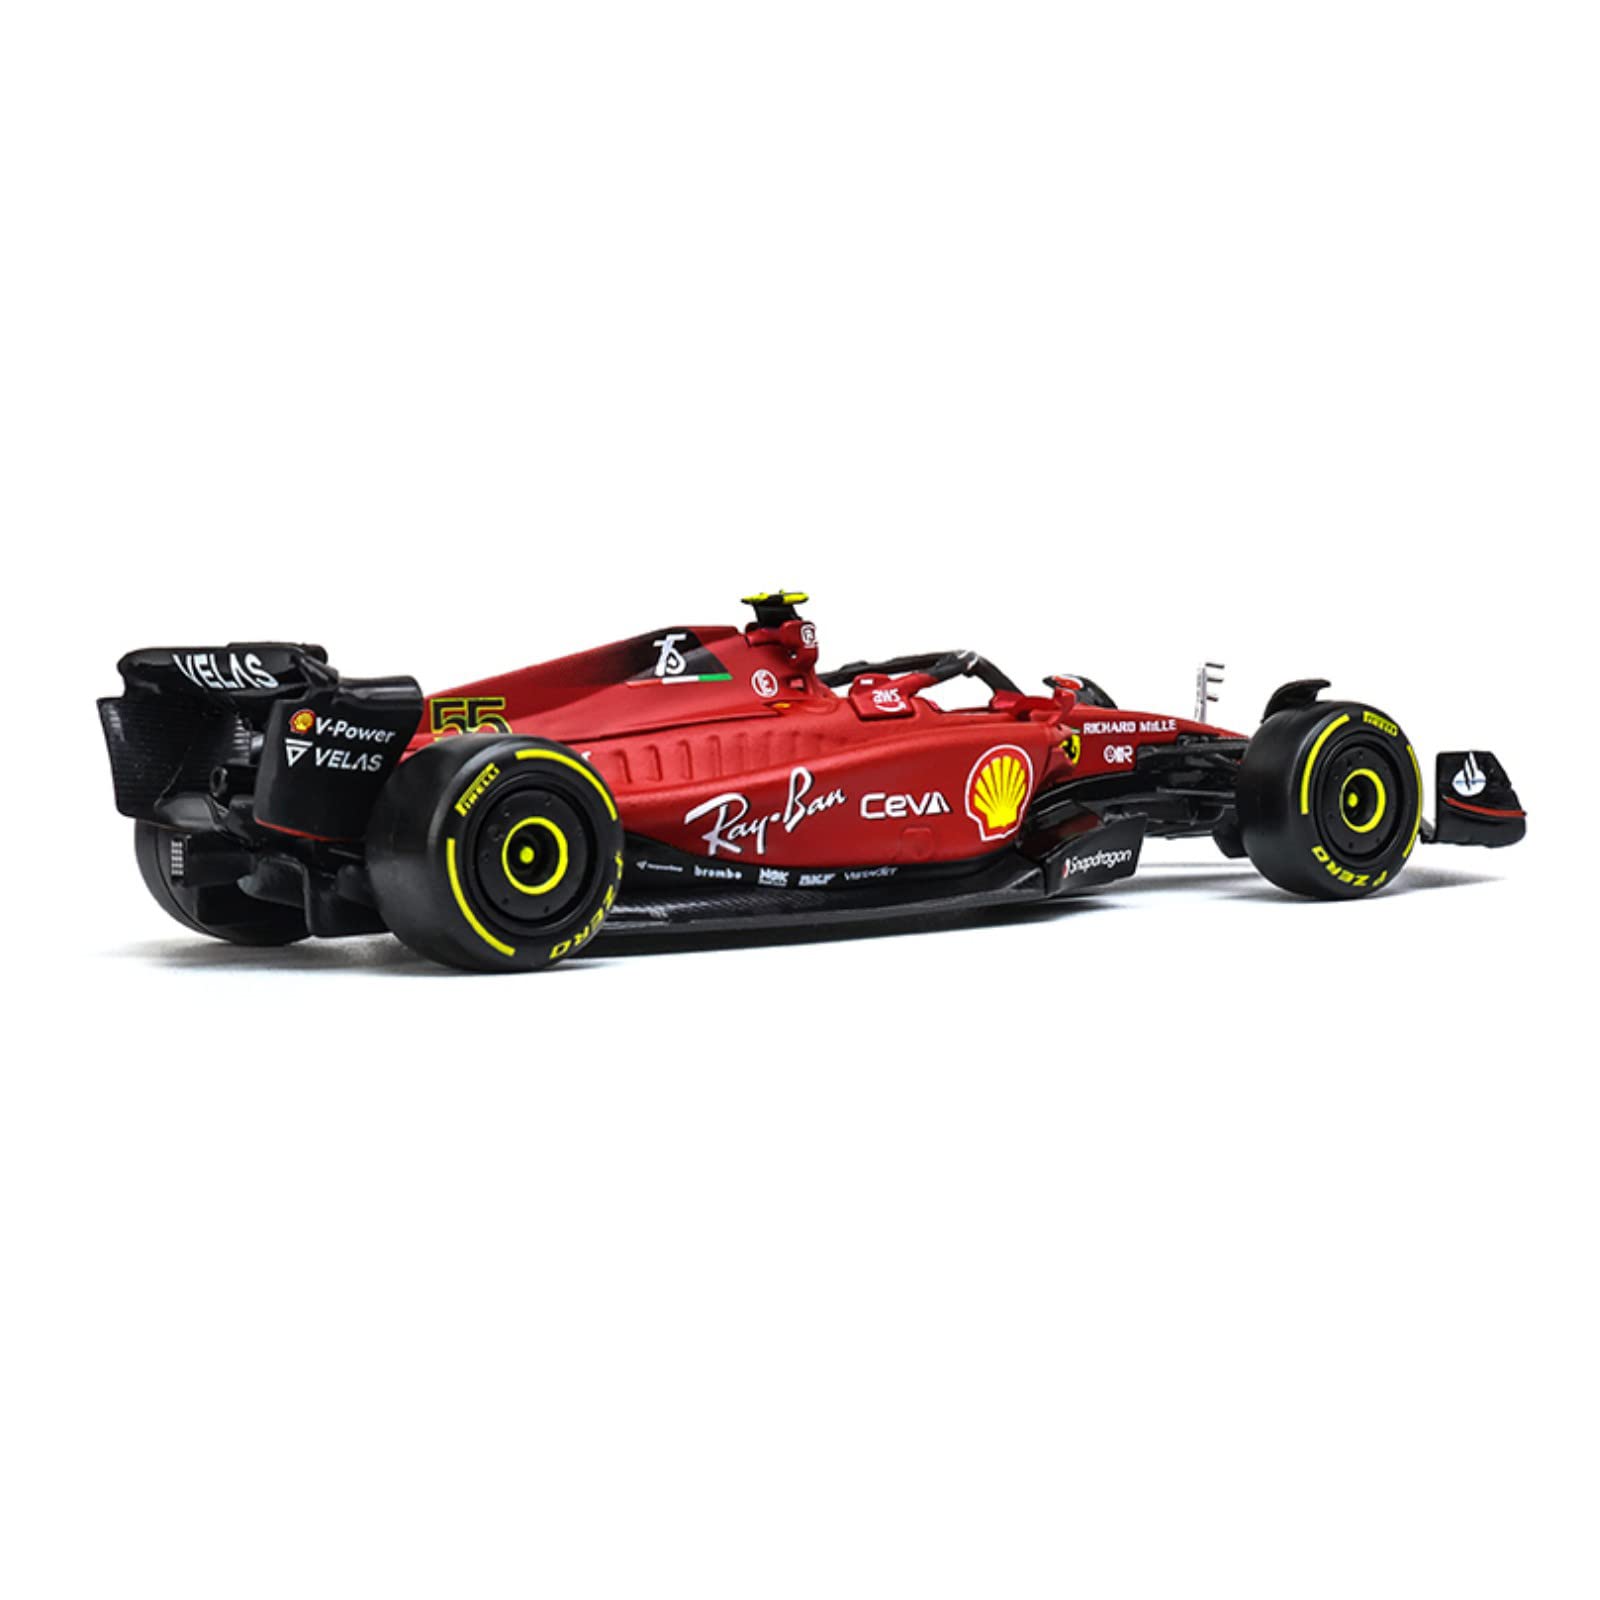 HTLNUZD Bburago 1:43 Latest 2022 F1-75#55 Carlos Sainz 1/43 Alloy Racing F1-75#55 Luxury Formula One Static Die Cast Vehicles Collectible Car Model Collection Gifts (Standard F1-75#55)